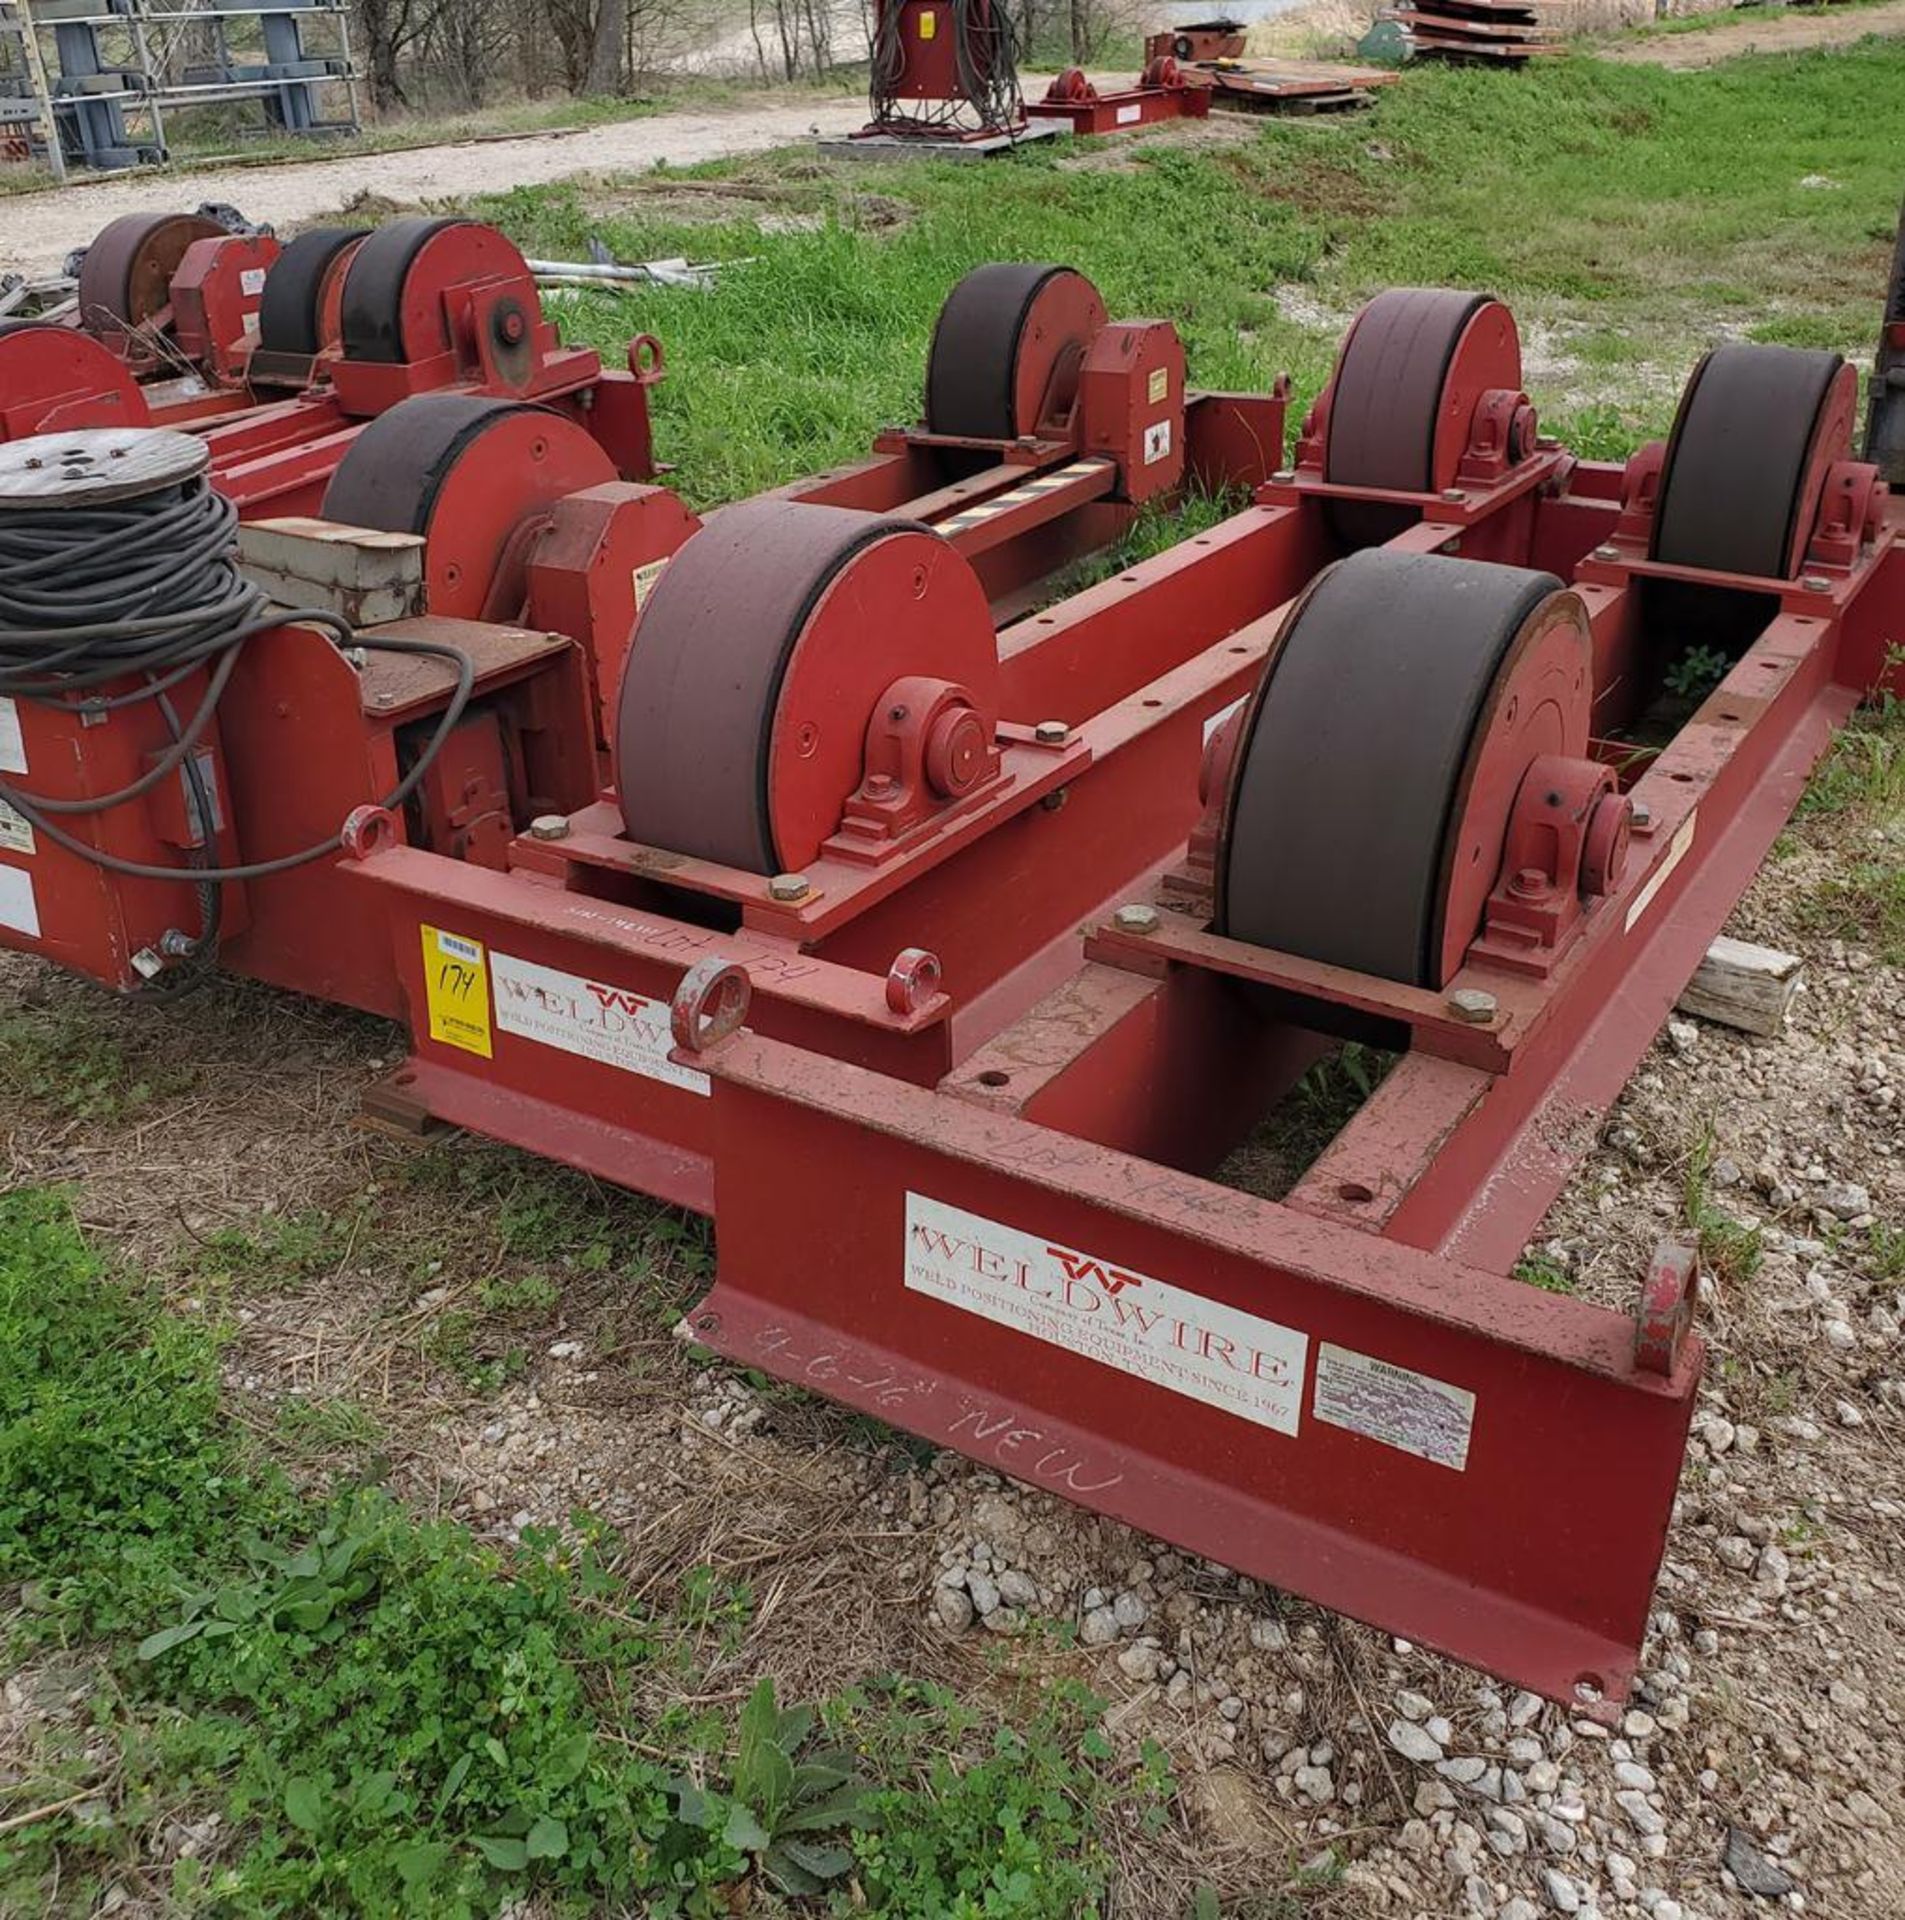 WELDWIRE WWRD-40 DRIVE ROLL, (2) WWR-40 40-TON CAPACITY IDLE ROLL, (1) DIVE IDLER, ADDITIONAL